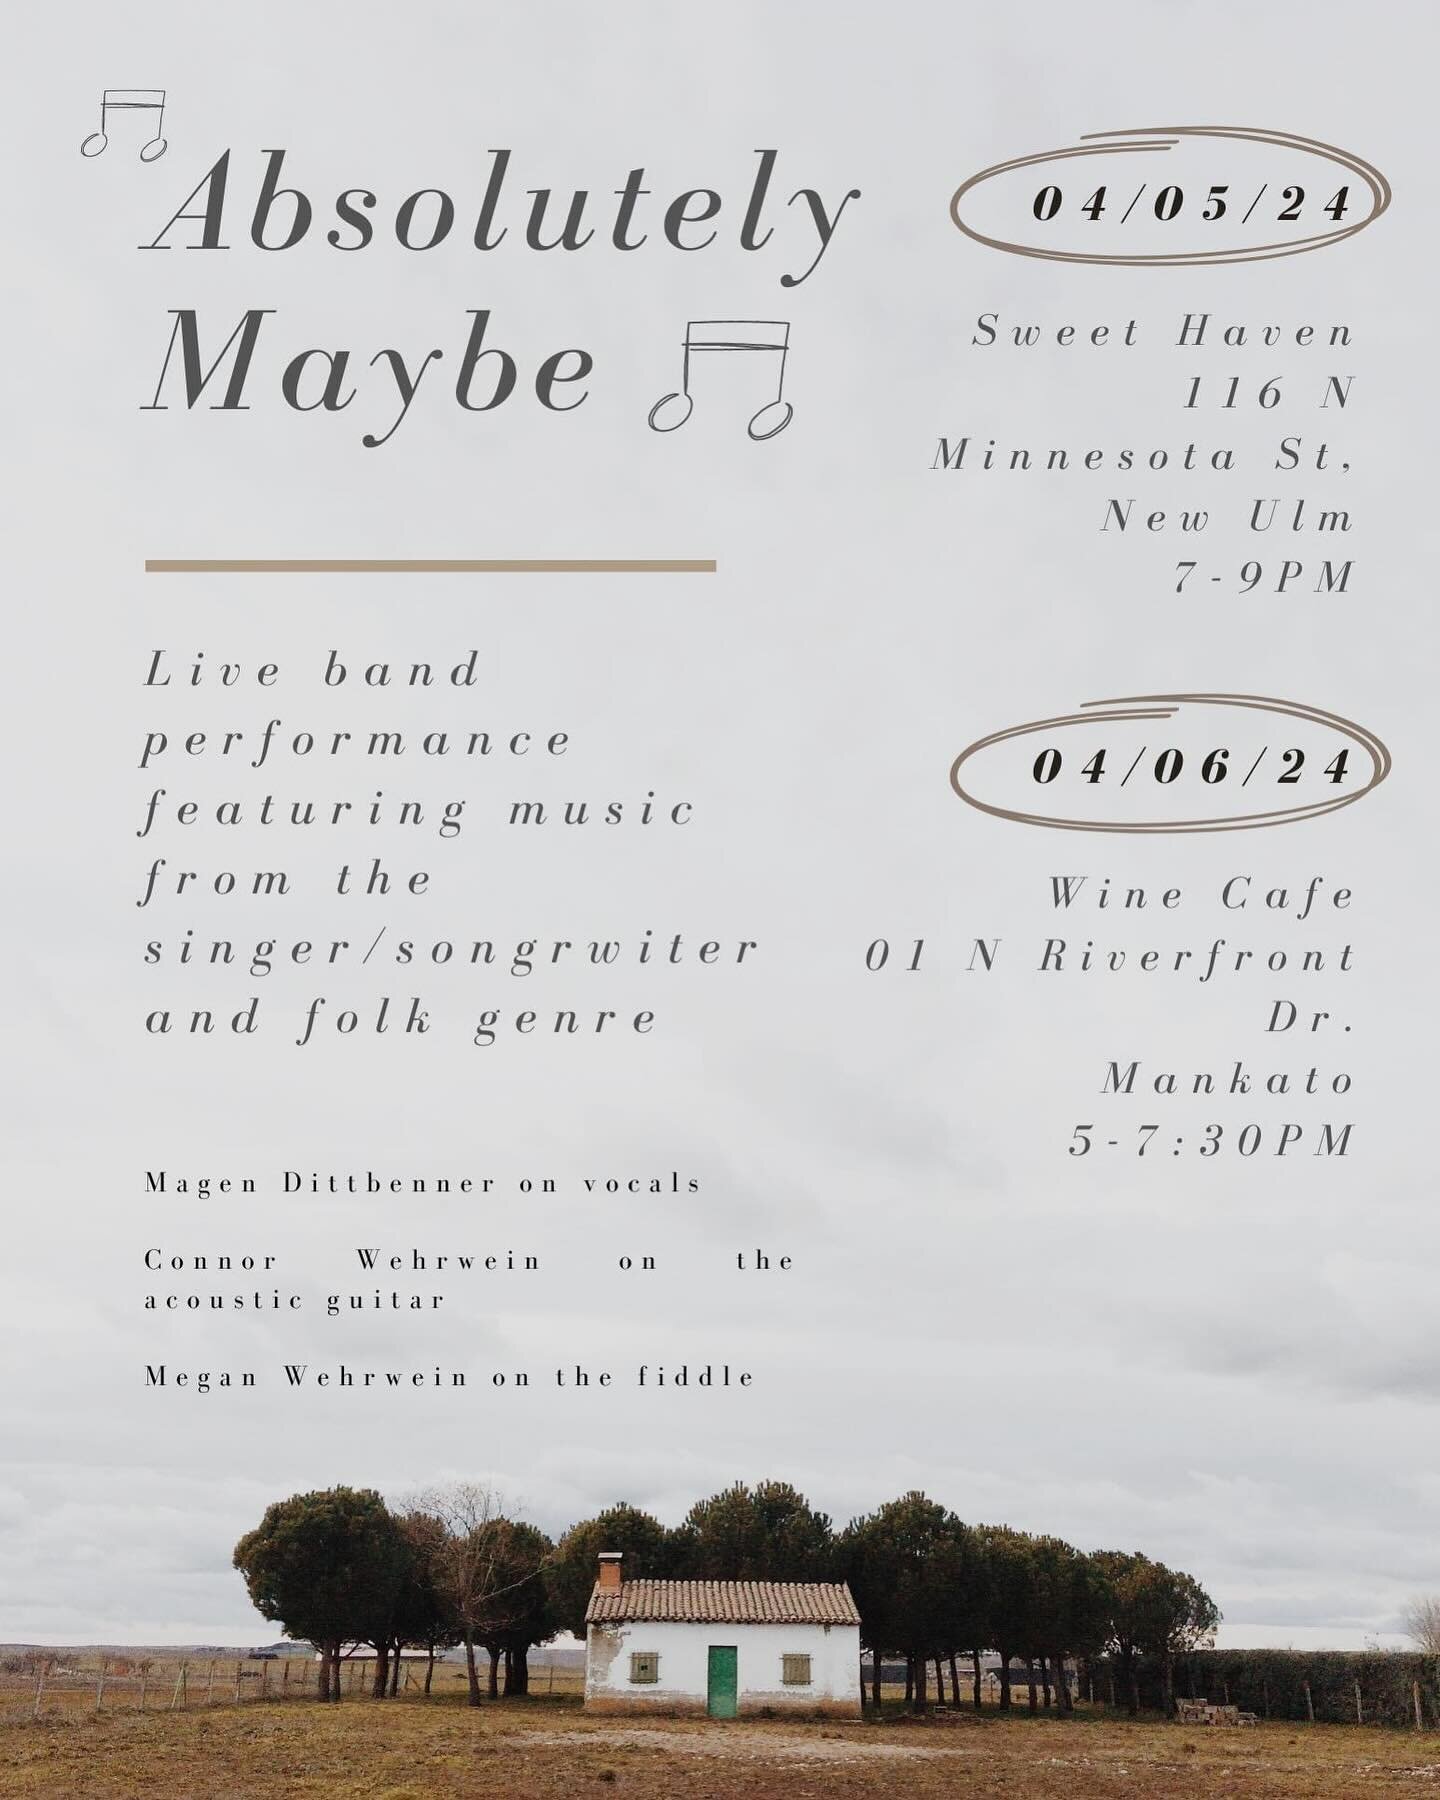 We have a super fun new band playing tonight! Come check out Absolutely Maybe 5-7:30!